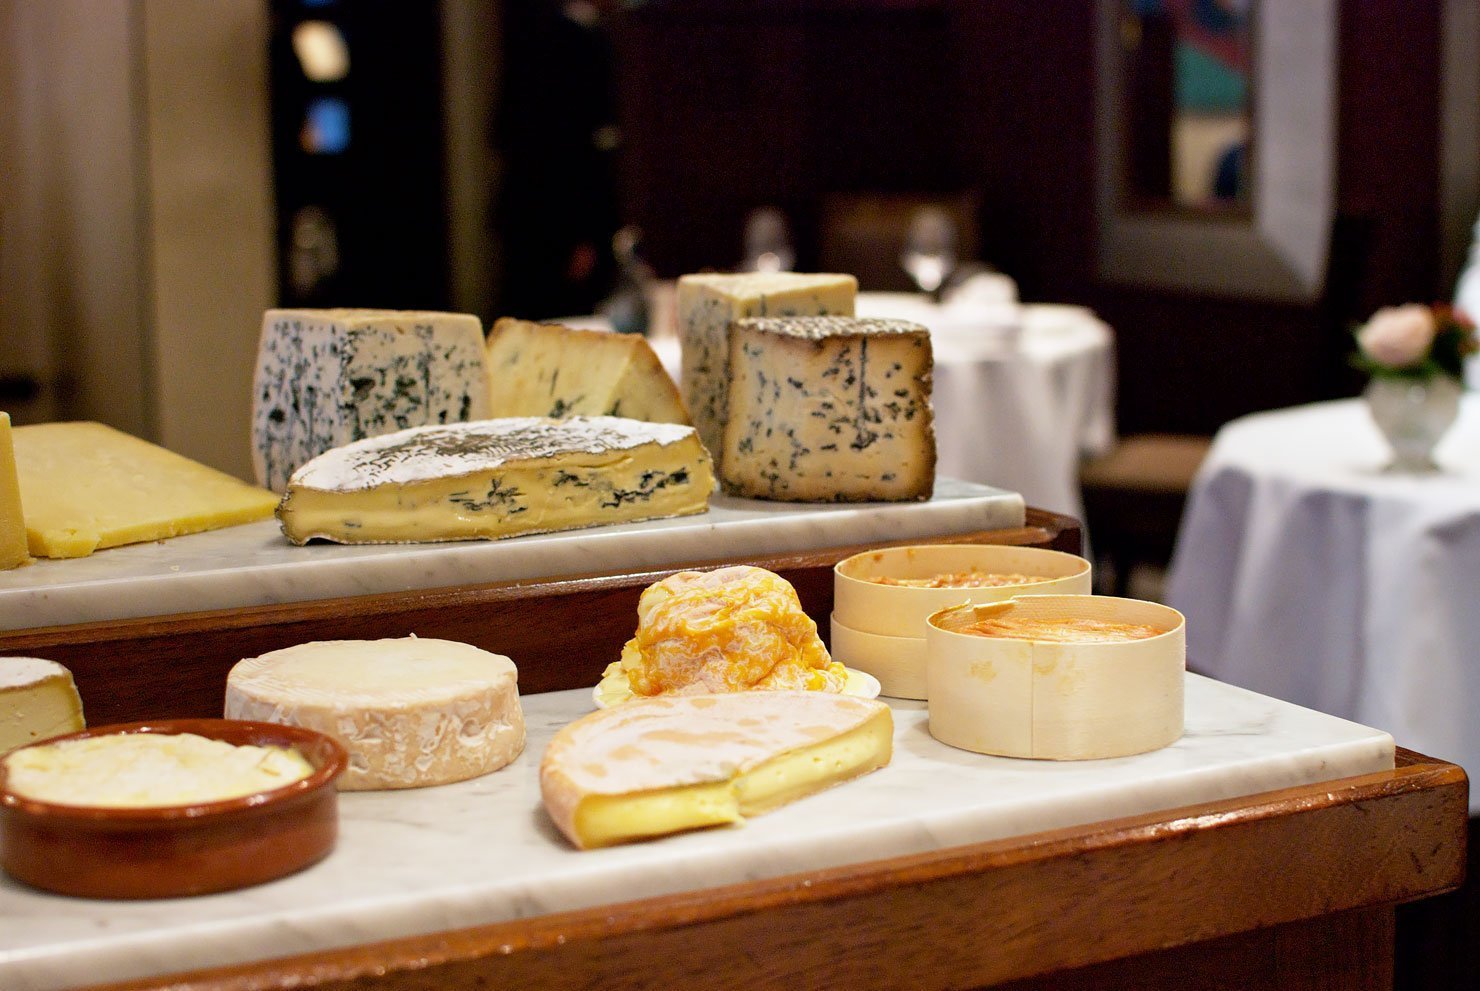 Review of a TRULY luxurious gift experience at The Square Restaurant in London. Cheese Cart